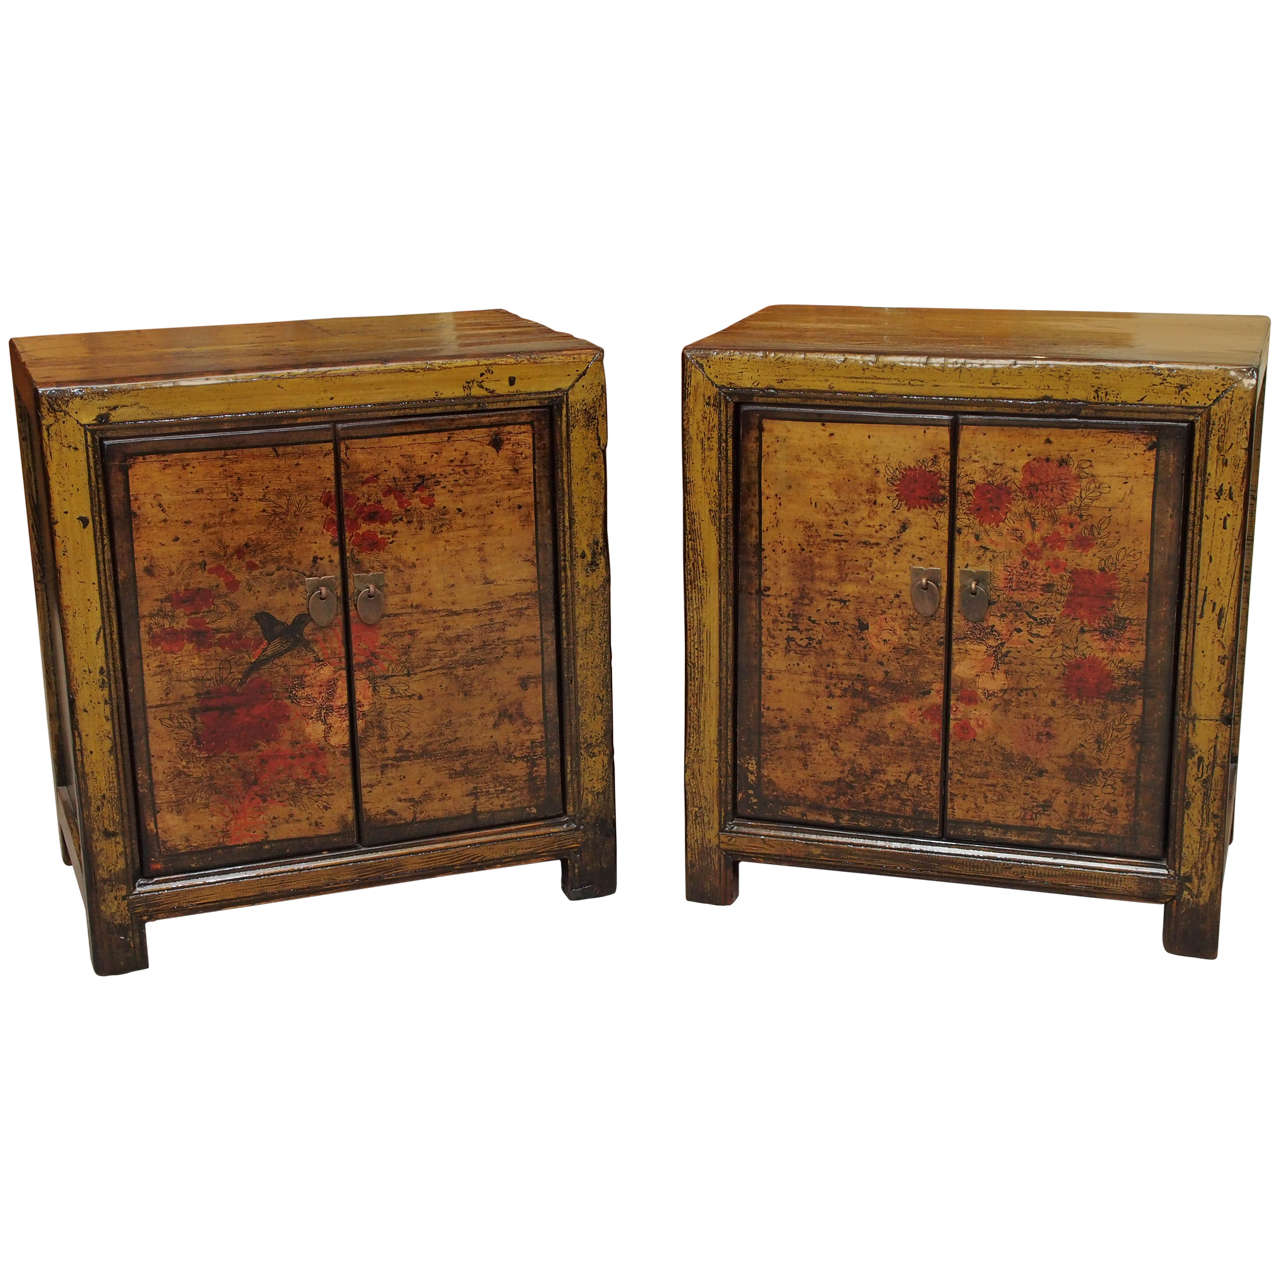 Pair Antique Chinese Lacquer Bedside Cabinets